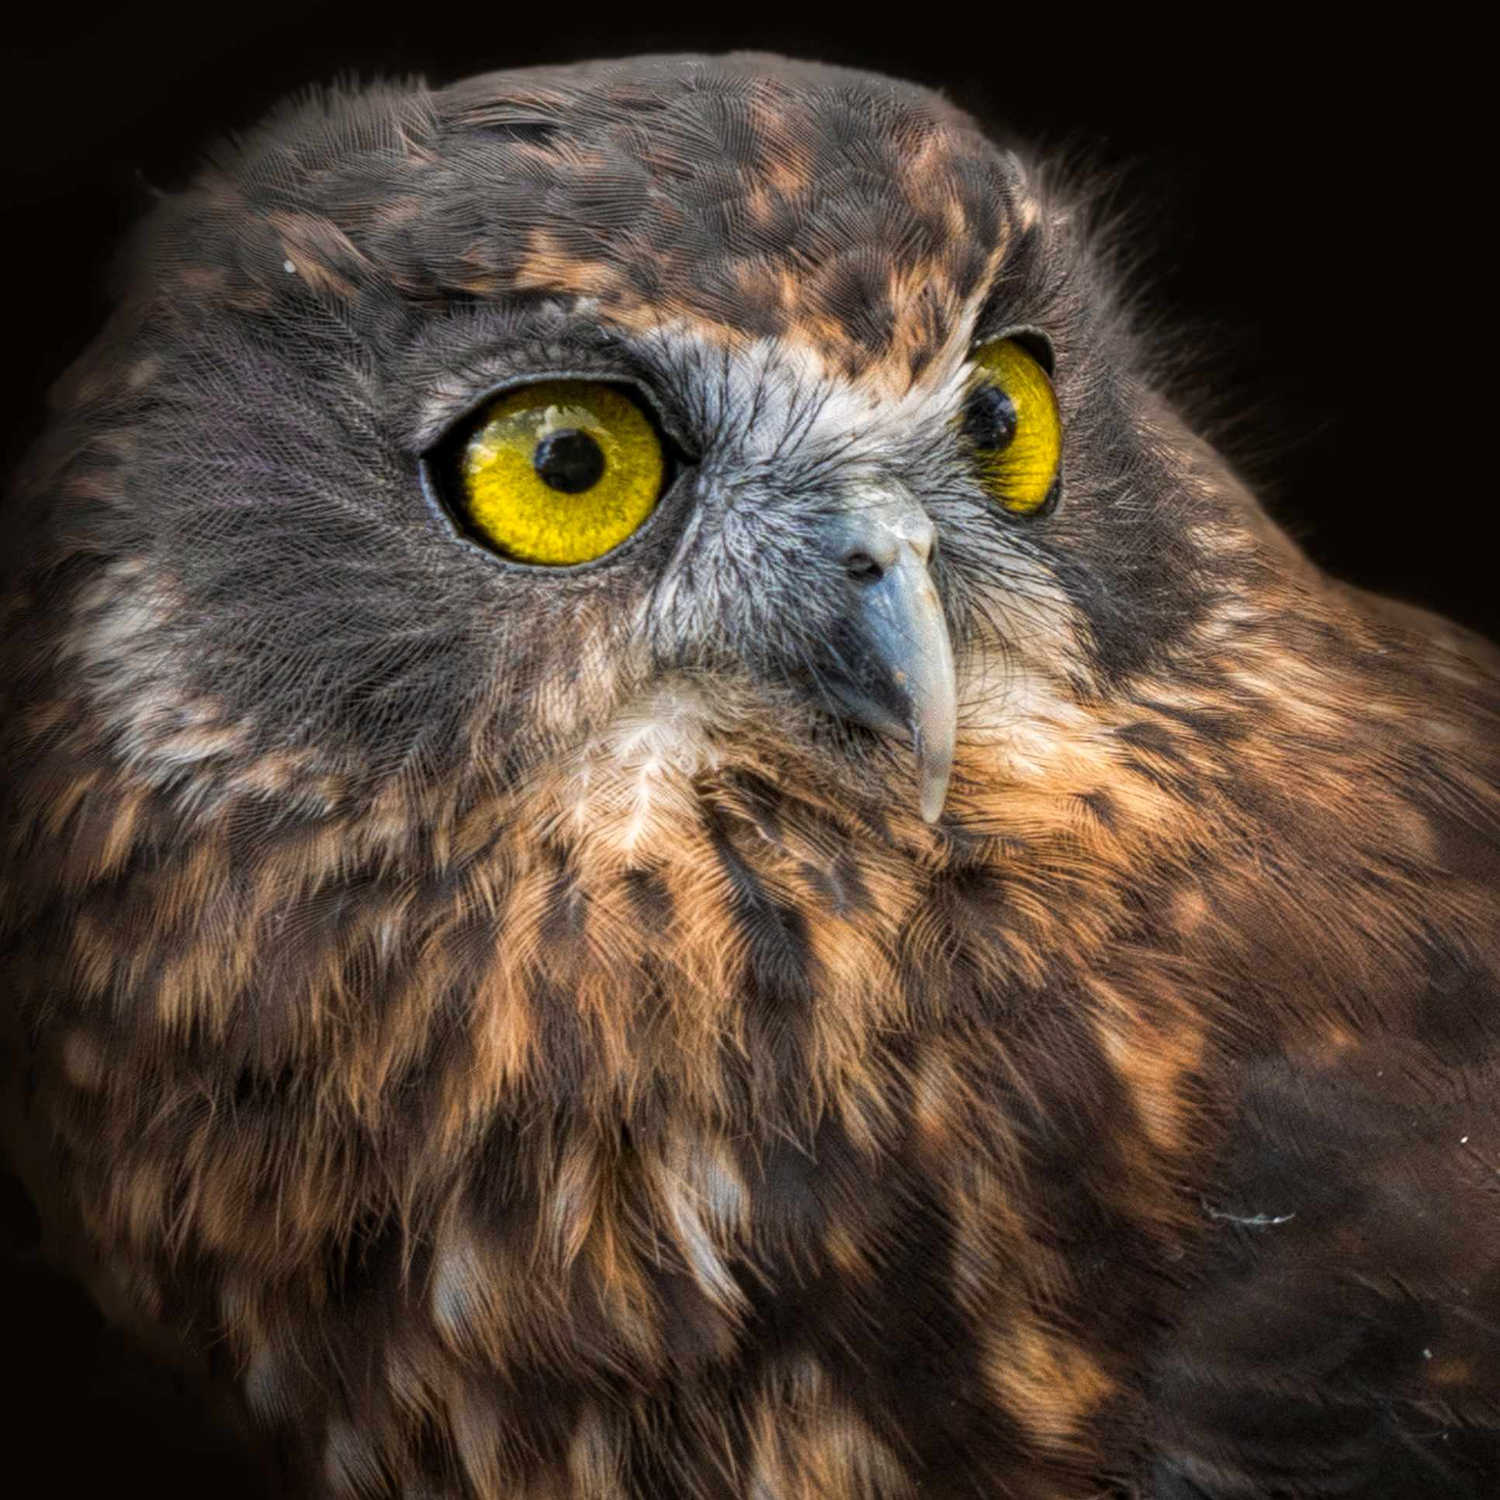 NZ owl - a ruru or morepork staring intently. Isolated with black background. , New Zealand